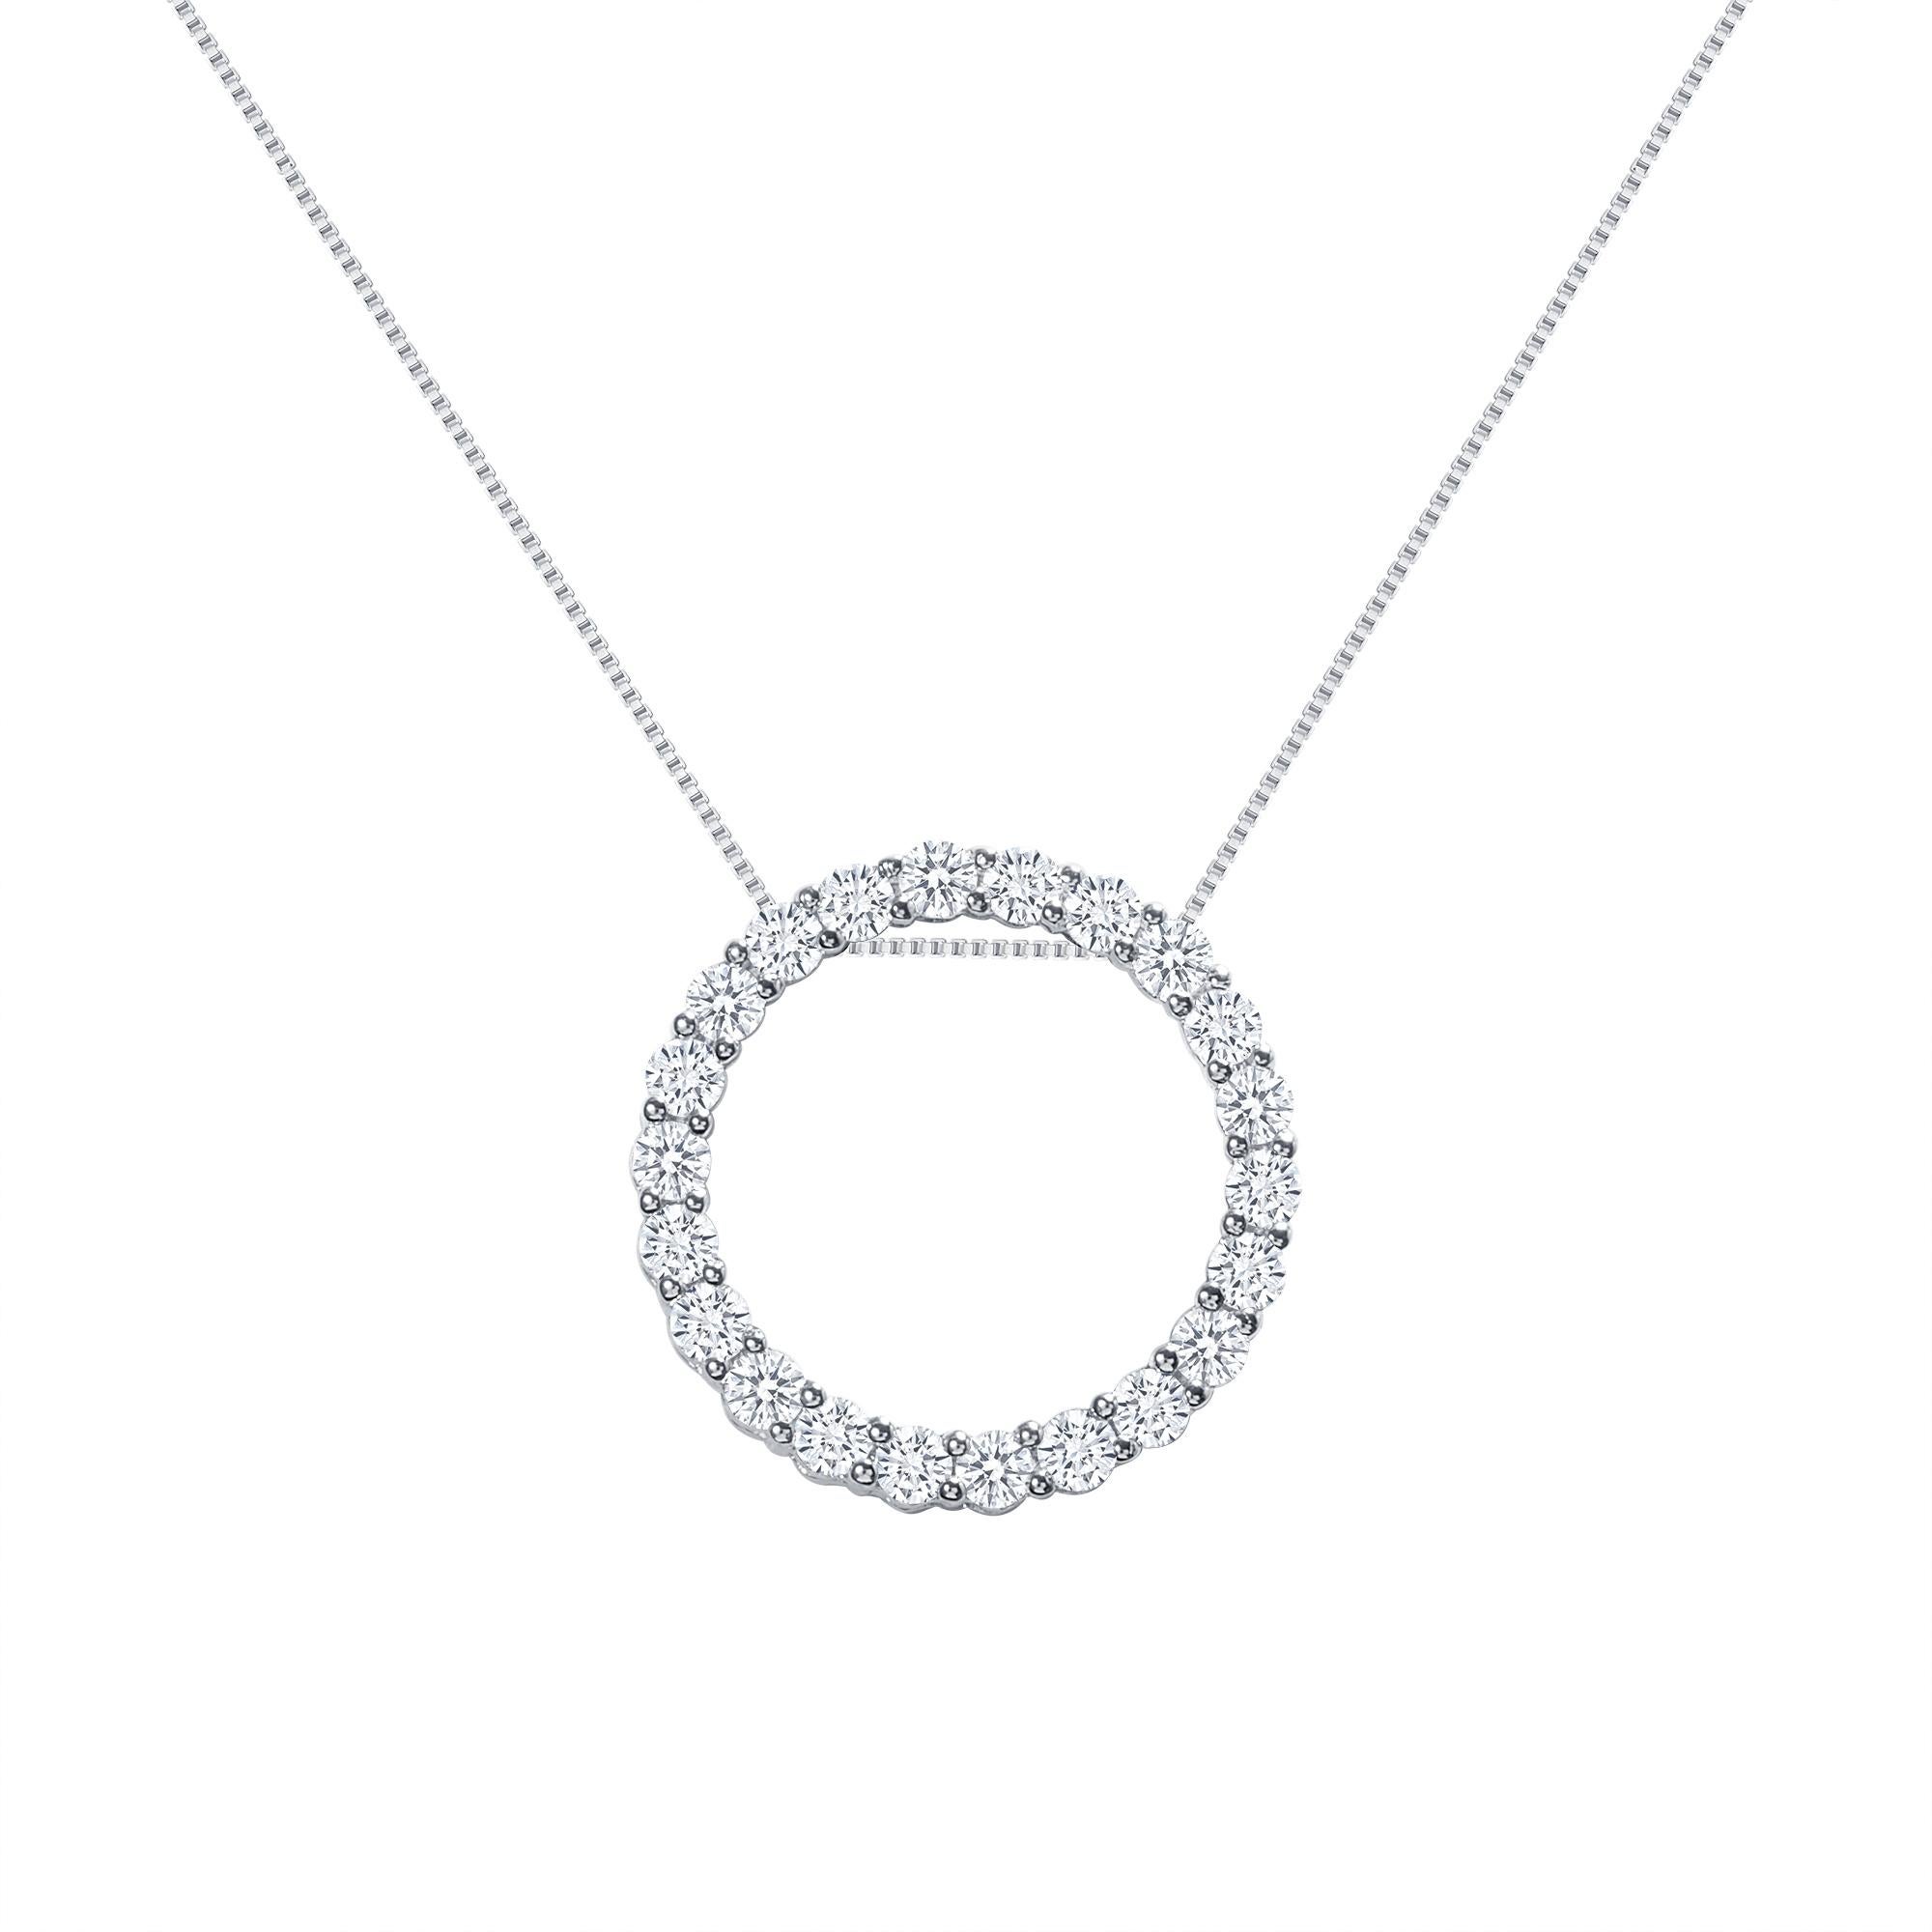 This diamond circle pendant provides a glowing chic look.
Metal: 14k Gold
Diamond Total Carats: 2 carat
Diamond Cut: Round Natural Diamonds (Not Lab Grown)
Diamond Clarity: VS
Diamond Color: F-G
Color: White Gold
Necklace Length: 18 inches